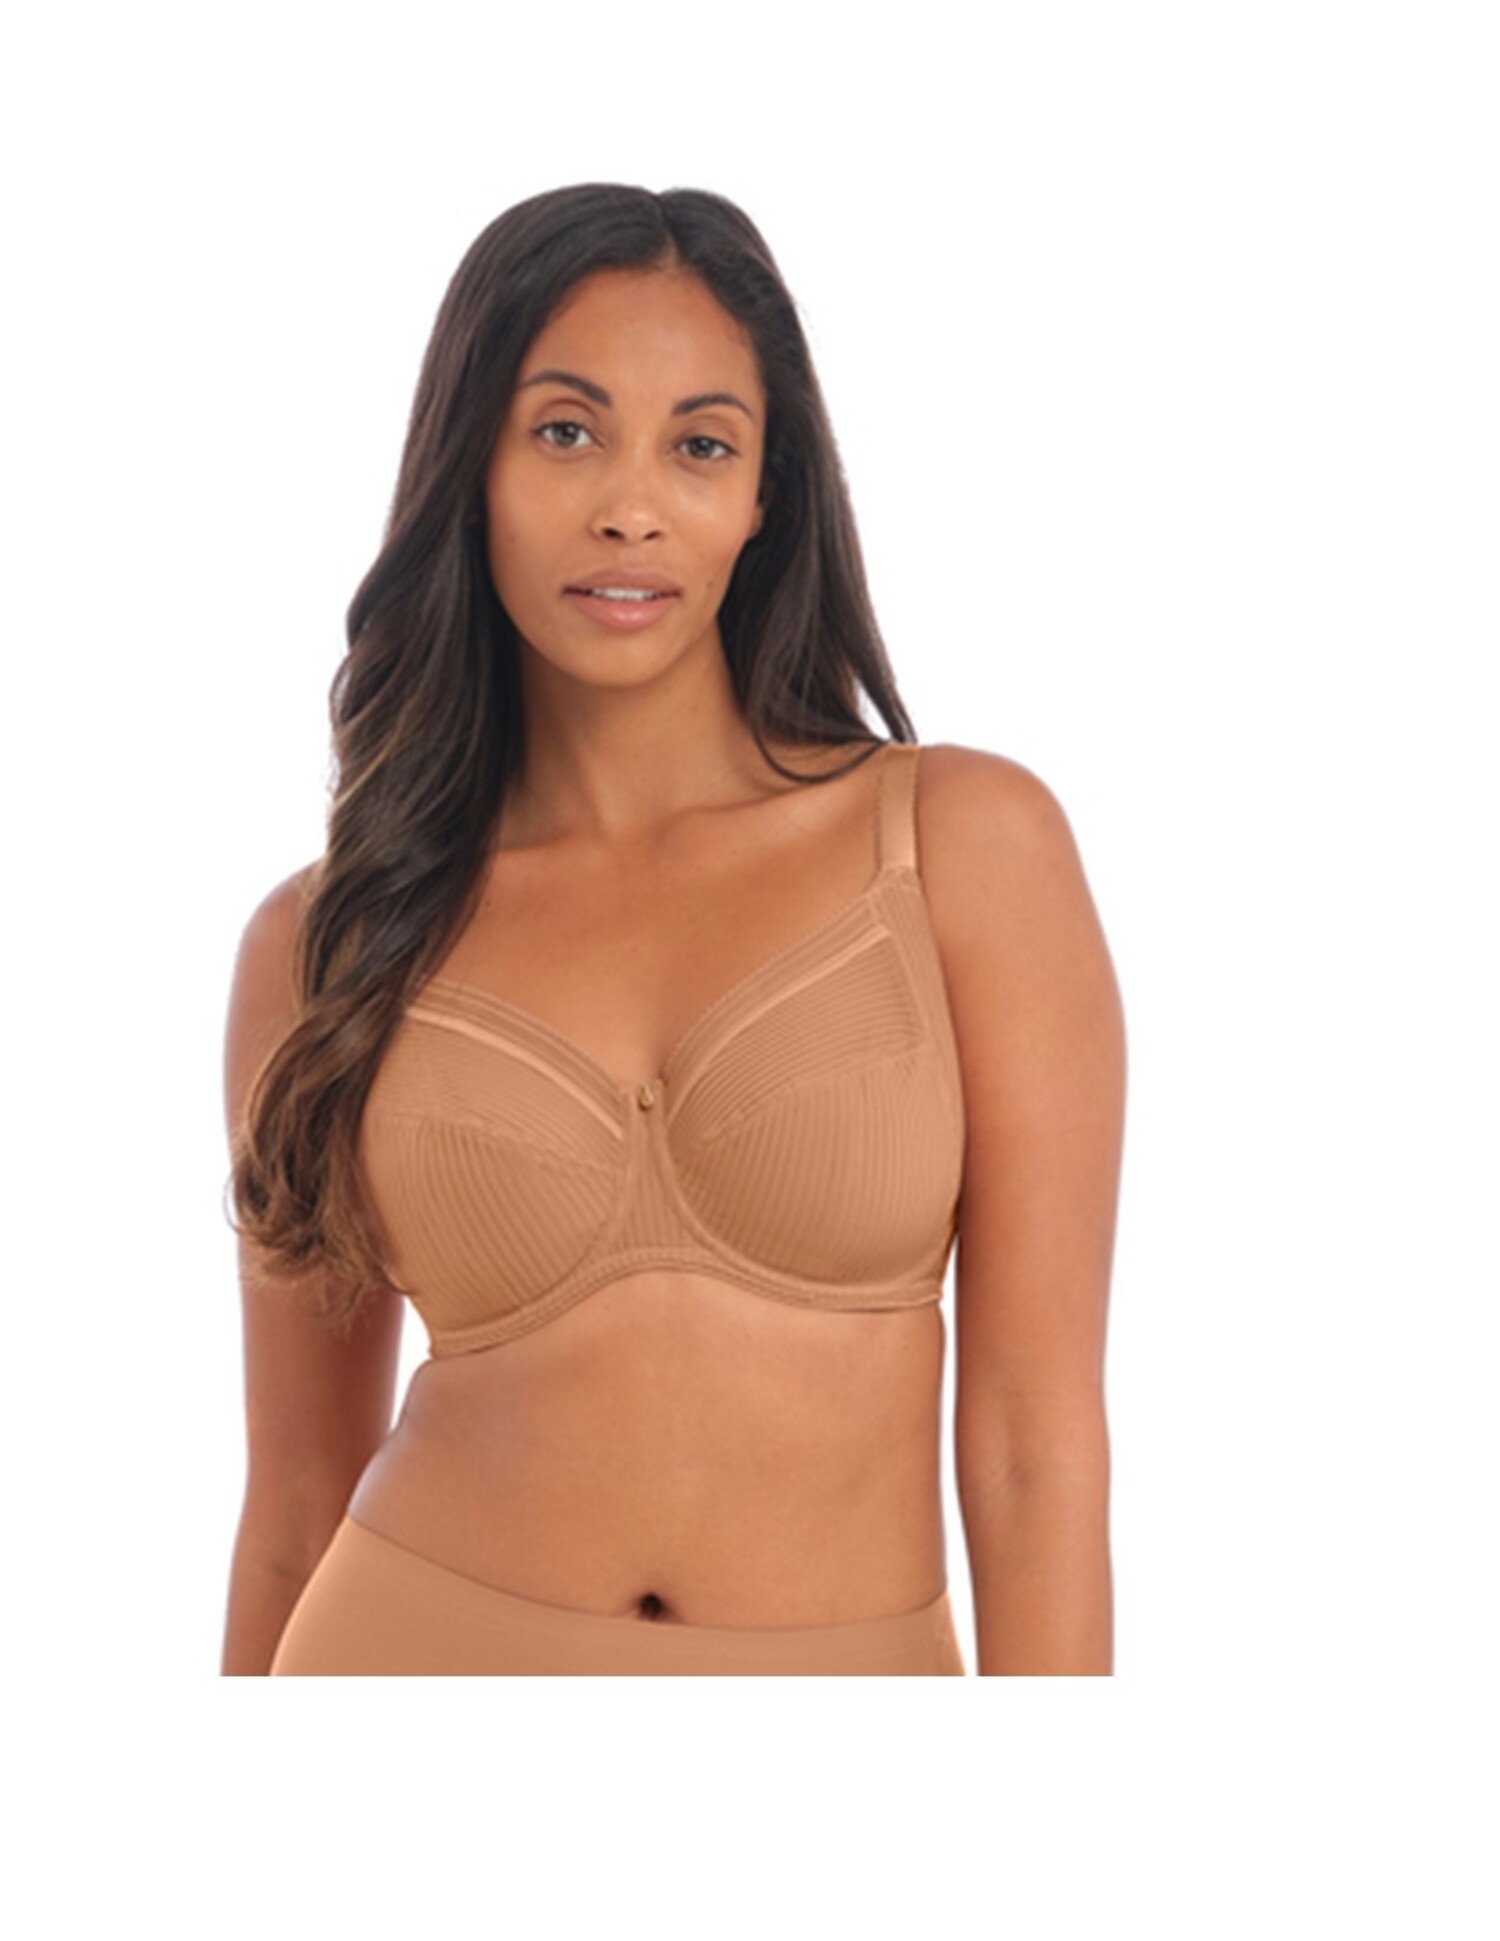 Fantasie Women's Smoothing Moulded Full Cup Bra, Nude, 30D at   Women's Clothing store: Bras